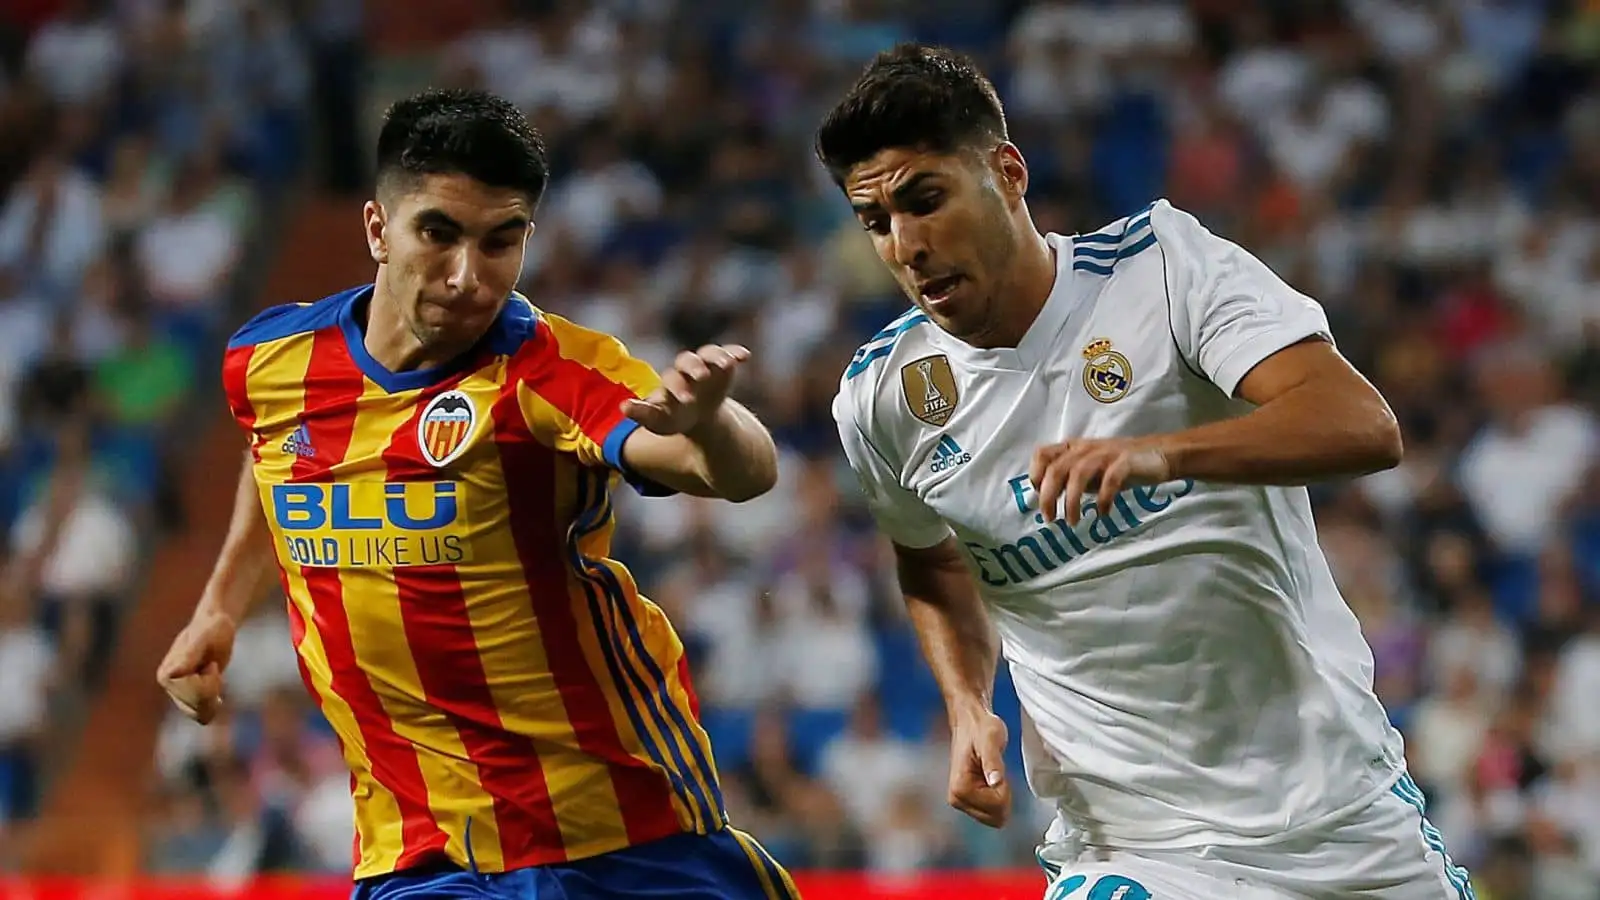 Real Madrid’s Marco Asensio in action with Valencia's Carlos Soler at the Bernabeu Stadium, LaLiga